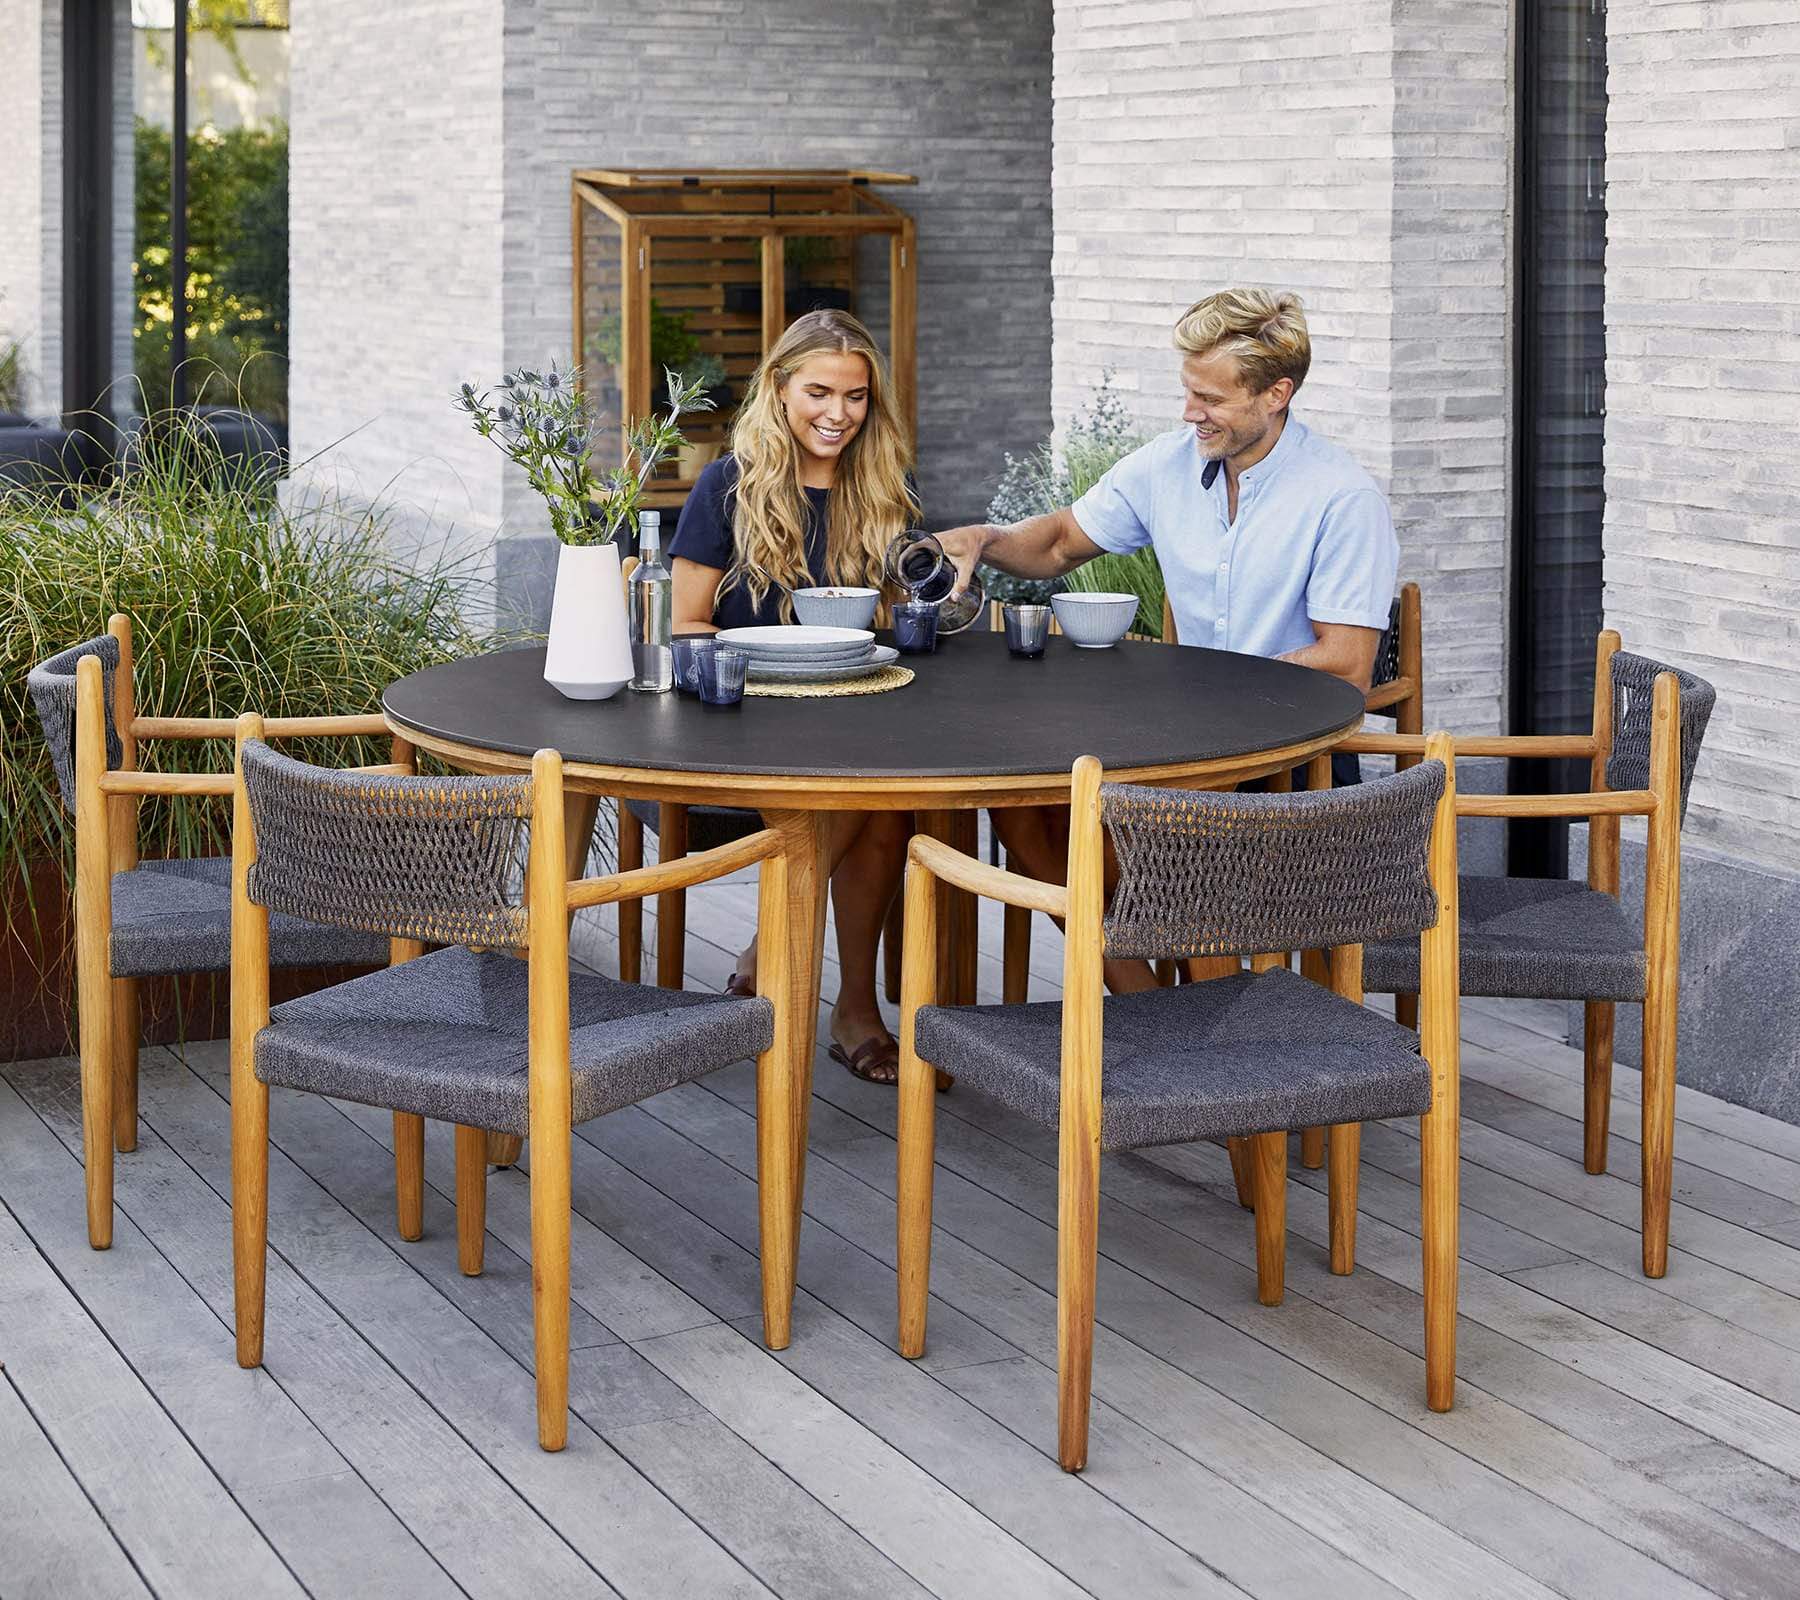 Boxhill's Aspect Teak Round Dining Table Fossil Black lifestyle image with man and woman sitting down